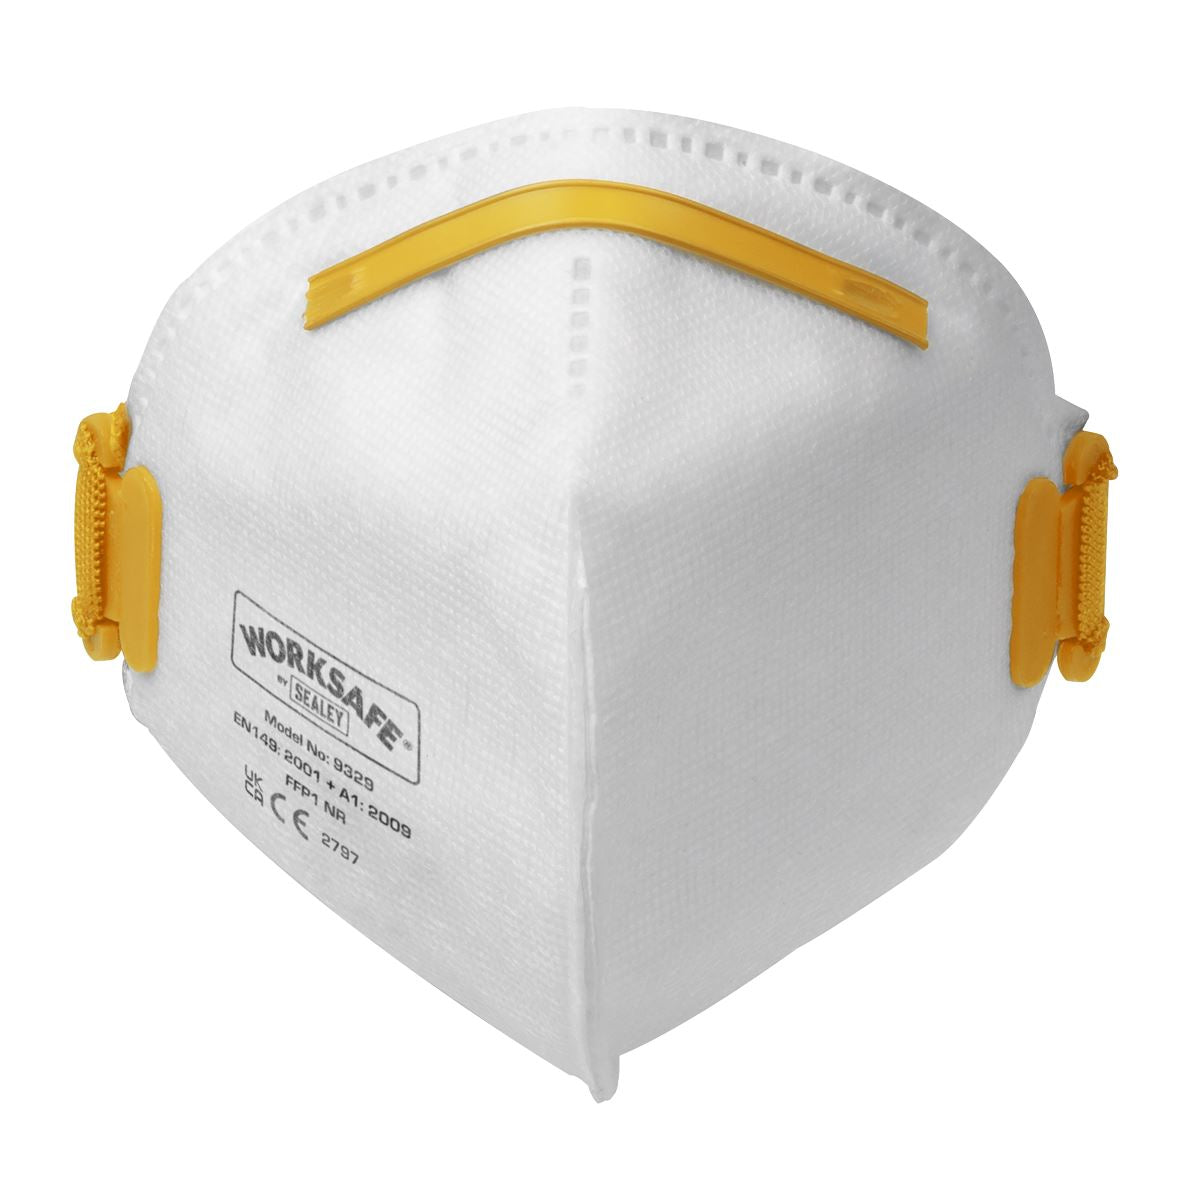 Worksafe by Sealey Fold Flat Mask FFP1 - Pack of 10